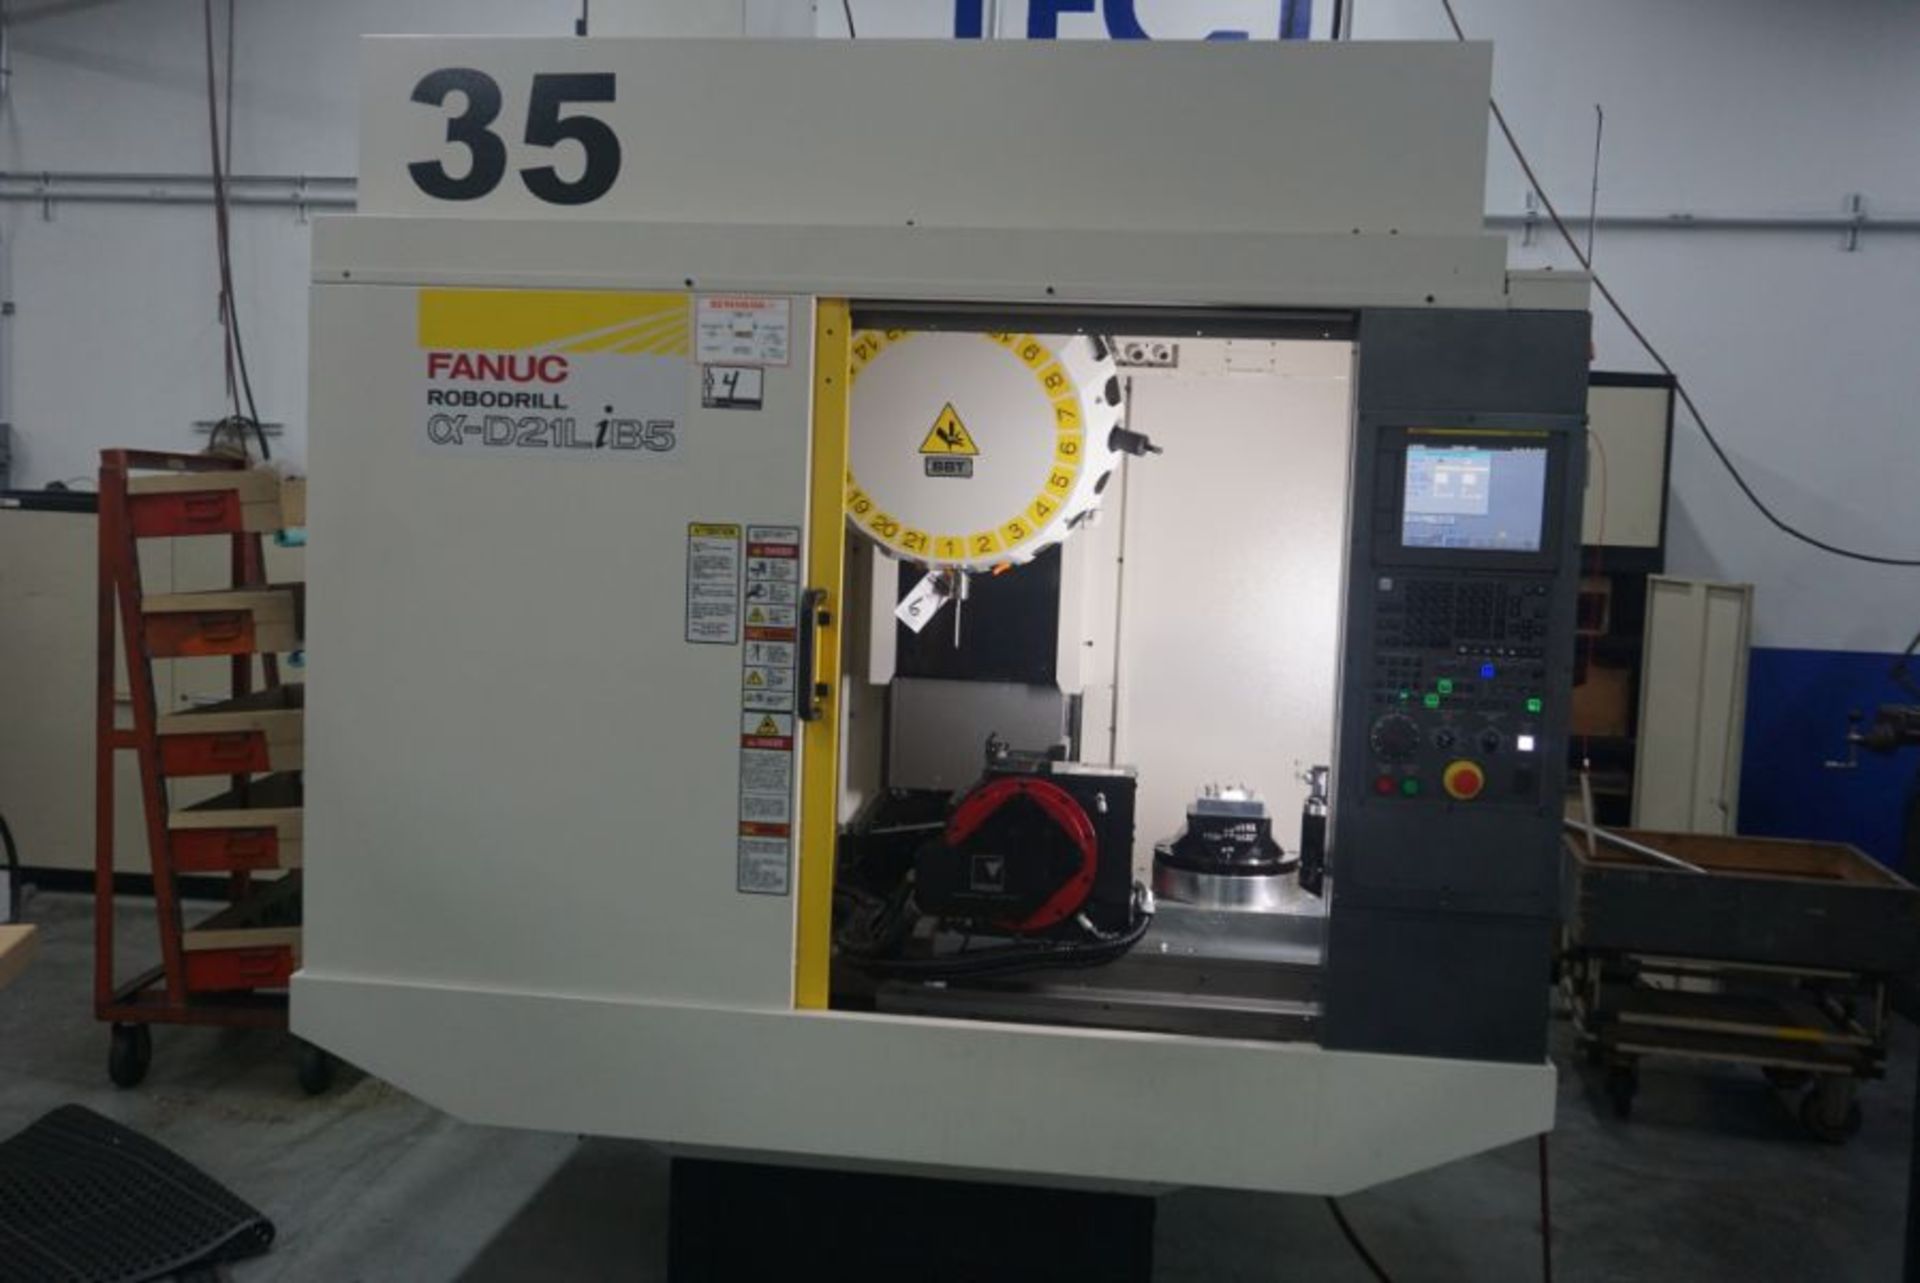 Fanuc Robodrill D21LiB5 5-Axis Vertical Machining Center, New 2018 *with Lots 5 & 6*